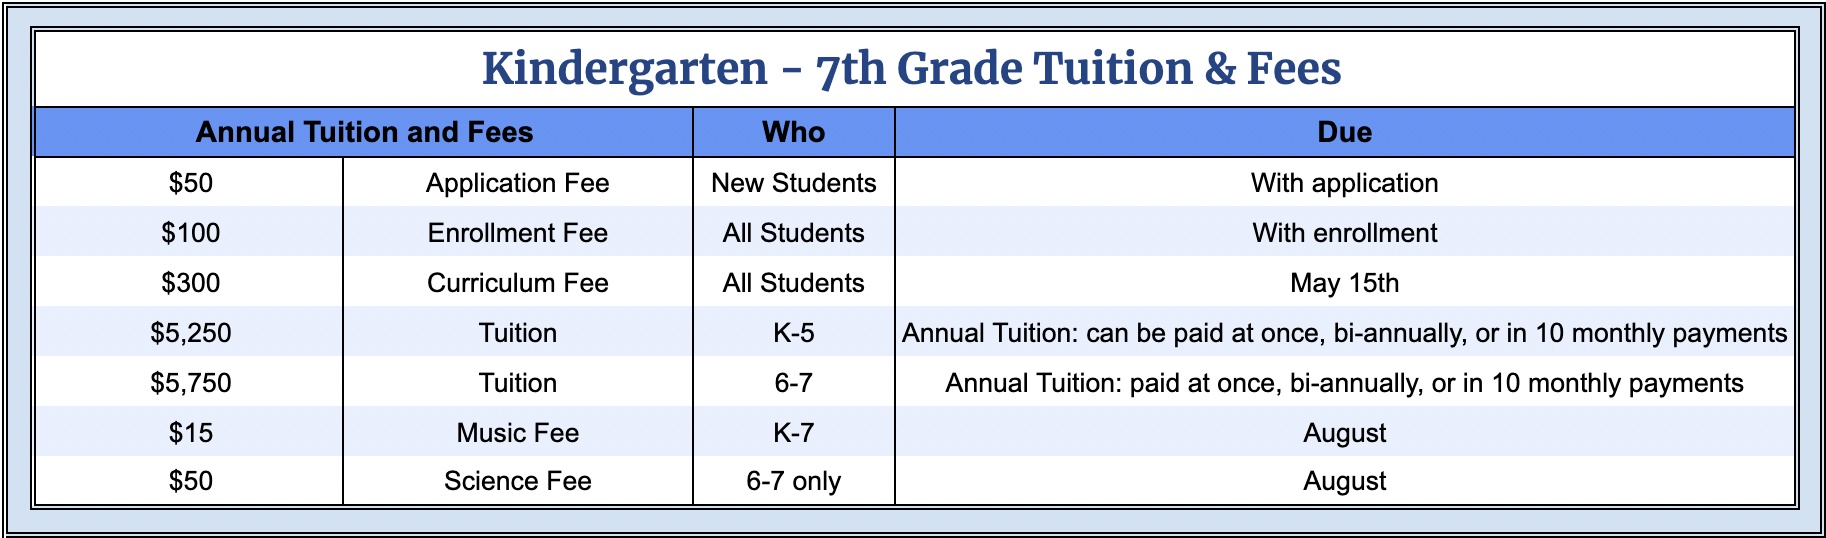 K 7 Tuition Fees